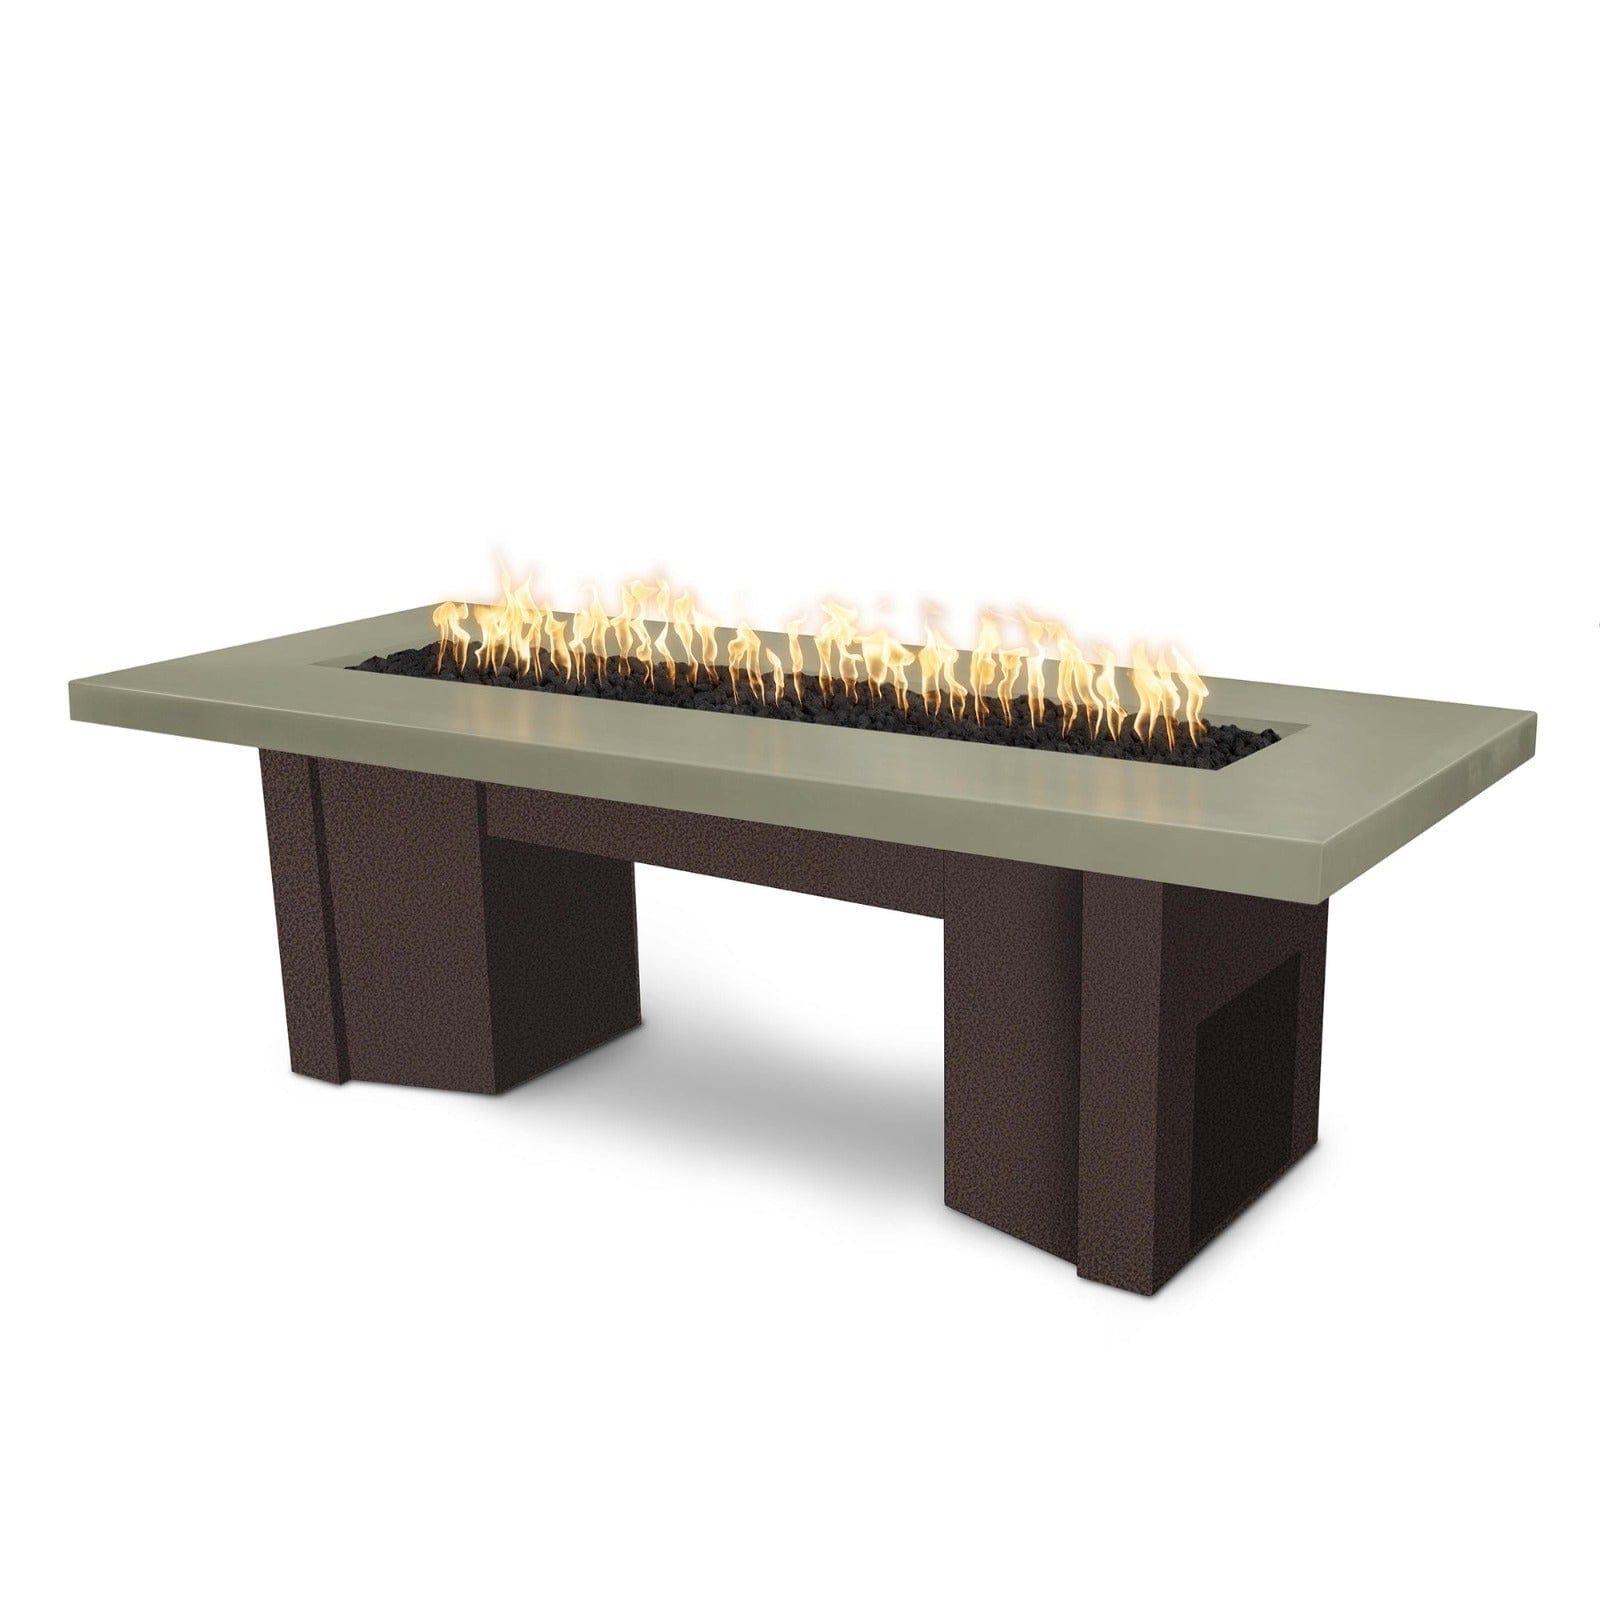 The Outdoor Plus Fire Features Ash (-ASH) / Copper Vein Powder Coated Steel (-CPV) The Outdoor Plus 60" Alameda Fire Table Smooth Concrete in Natural Gas - Flame Sense System with Push Button Spark Igniter / OPT-ALMGFRC60FSEN-NG